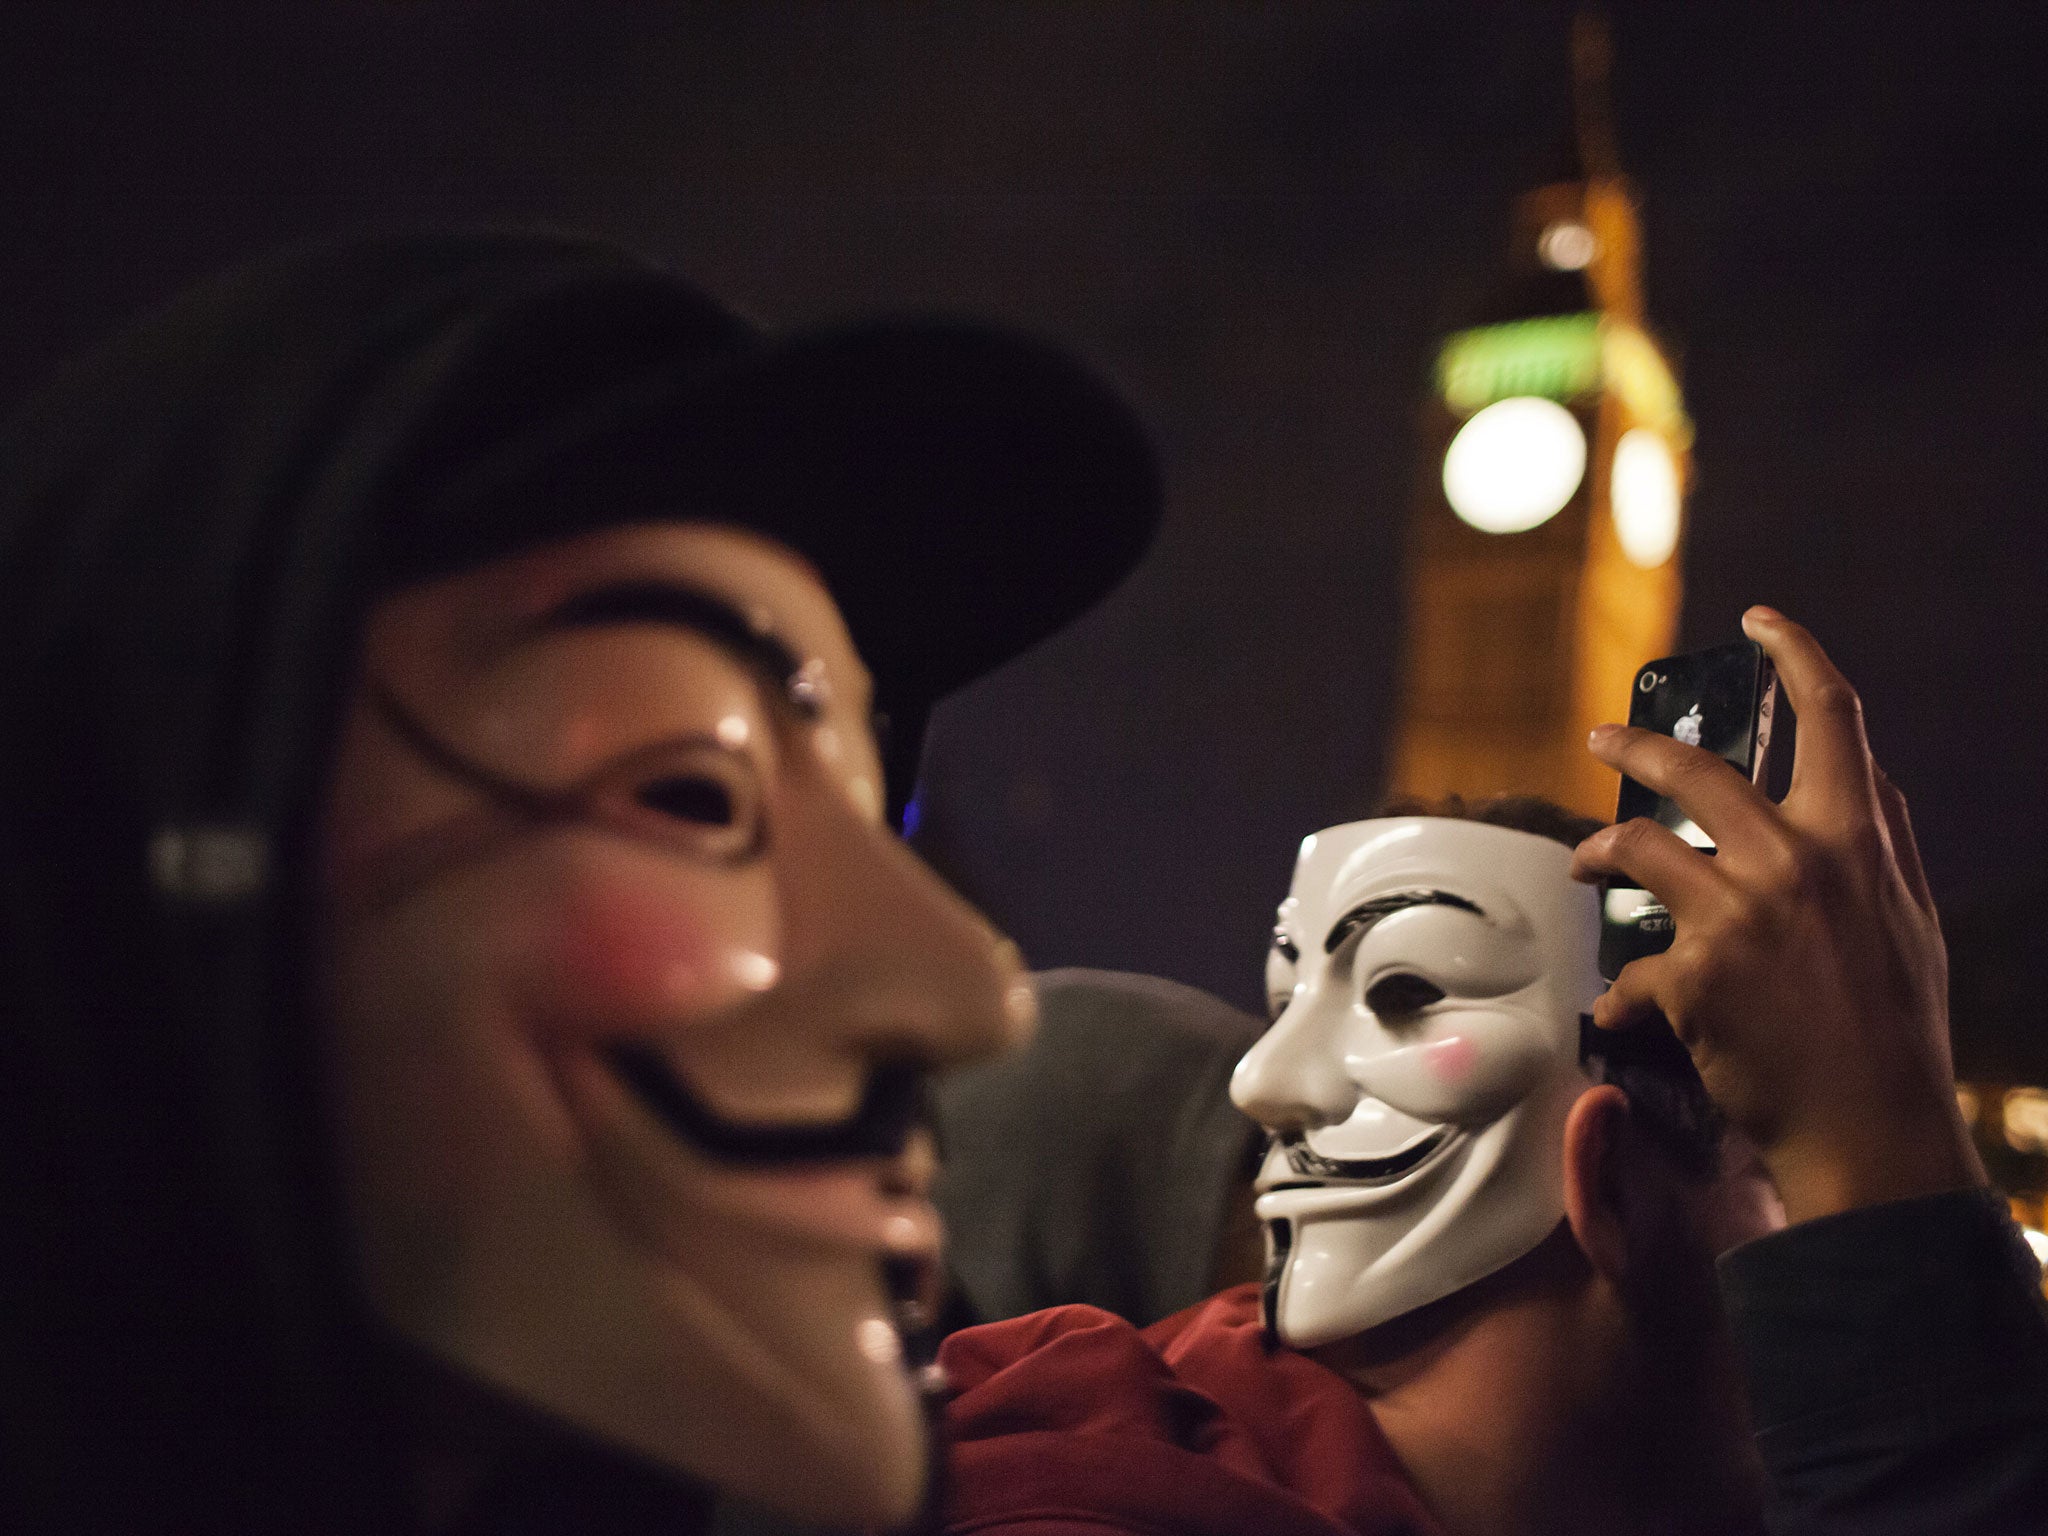 Protestors in the UK are seen wearing the Guy Fawkes mask commonly associated with the Anonymous group.